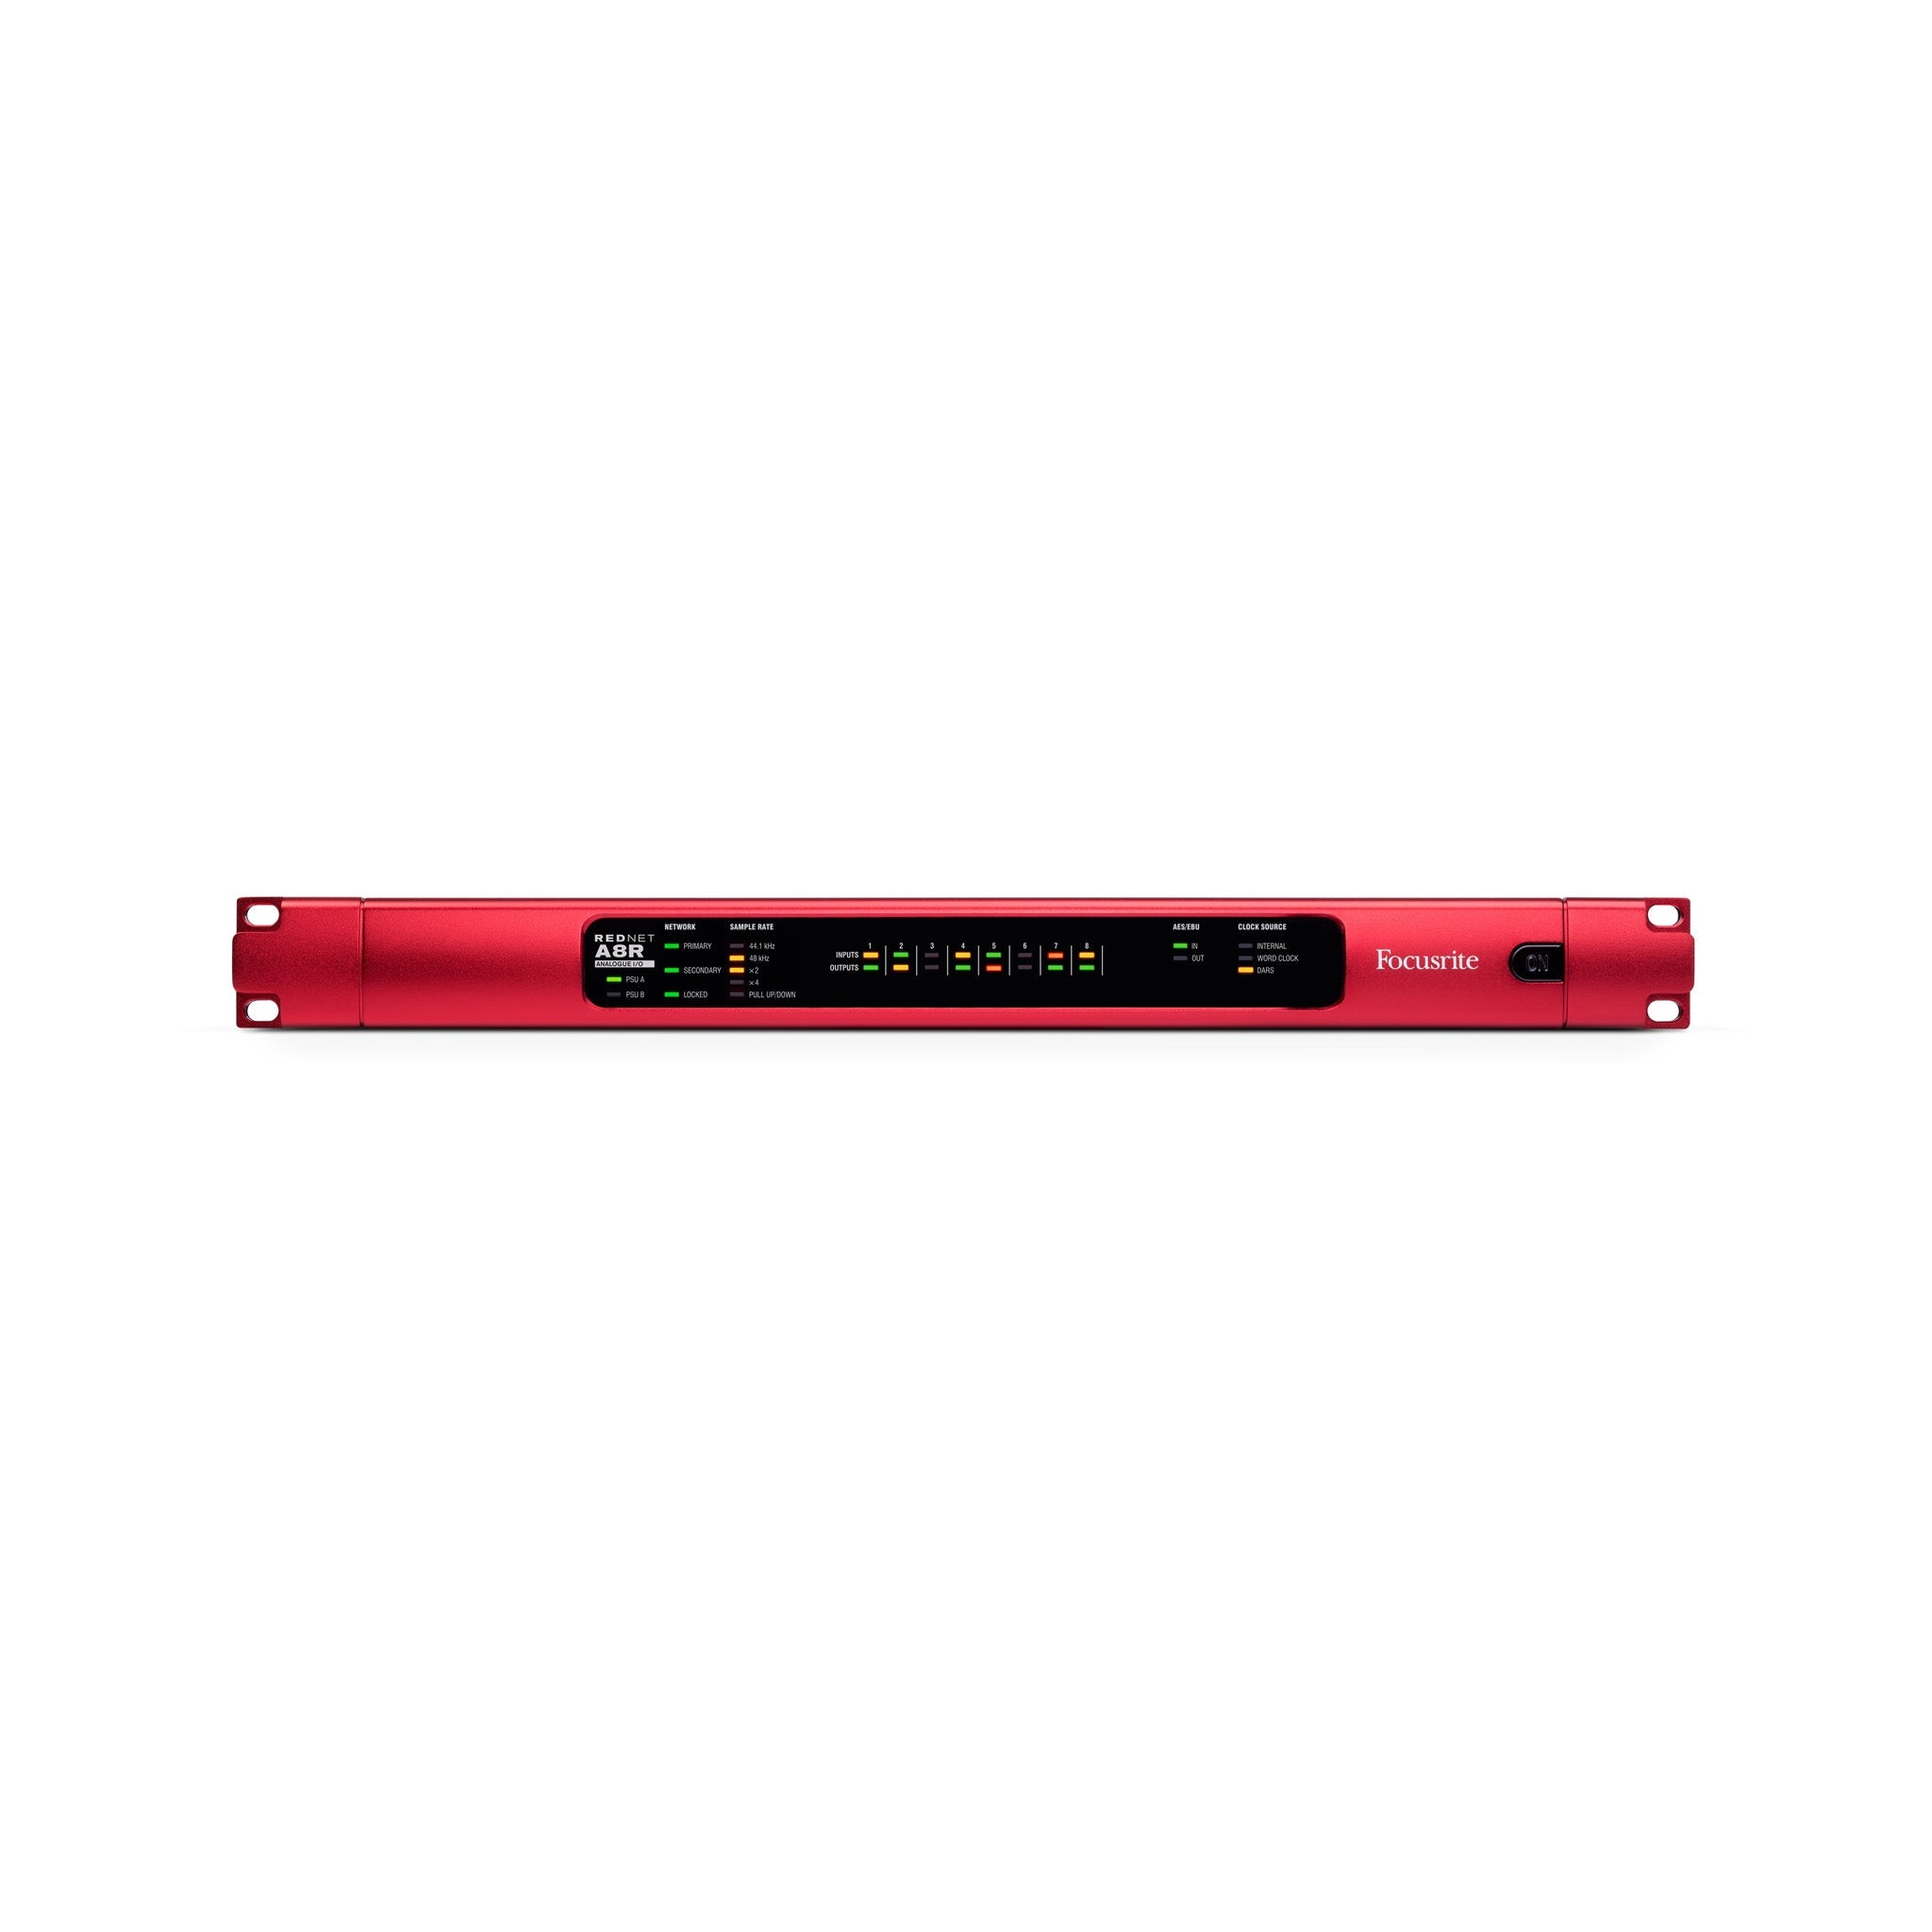 Focusrite Rednet A8R 8-in/8-out Ethernet Audio Network Interface with Power Supply Redundancy